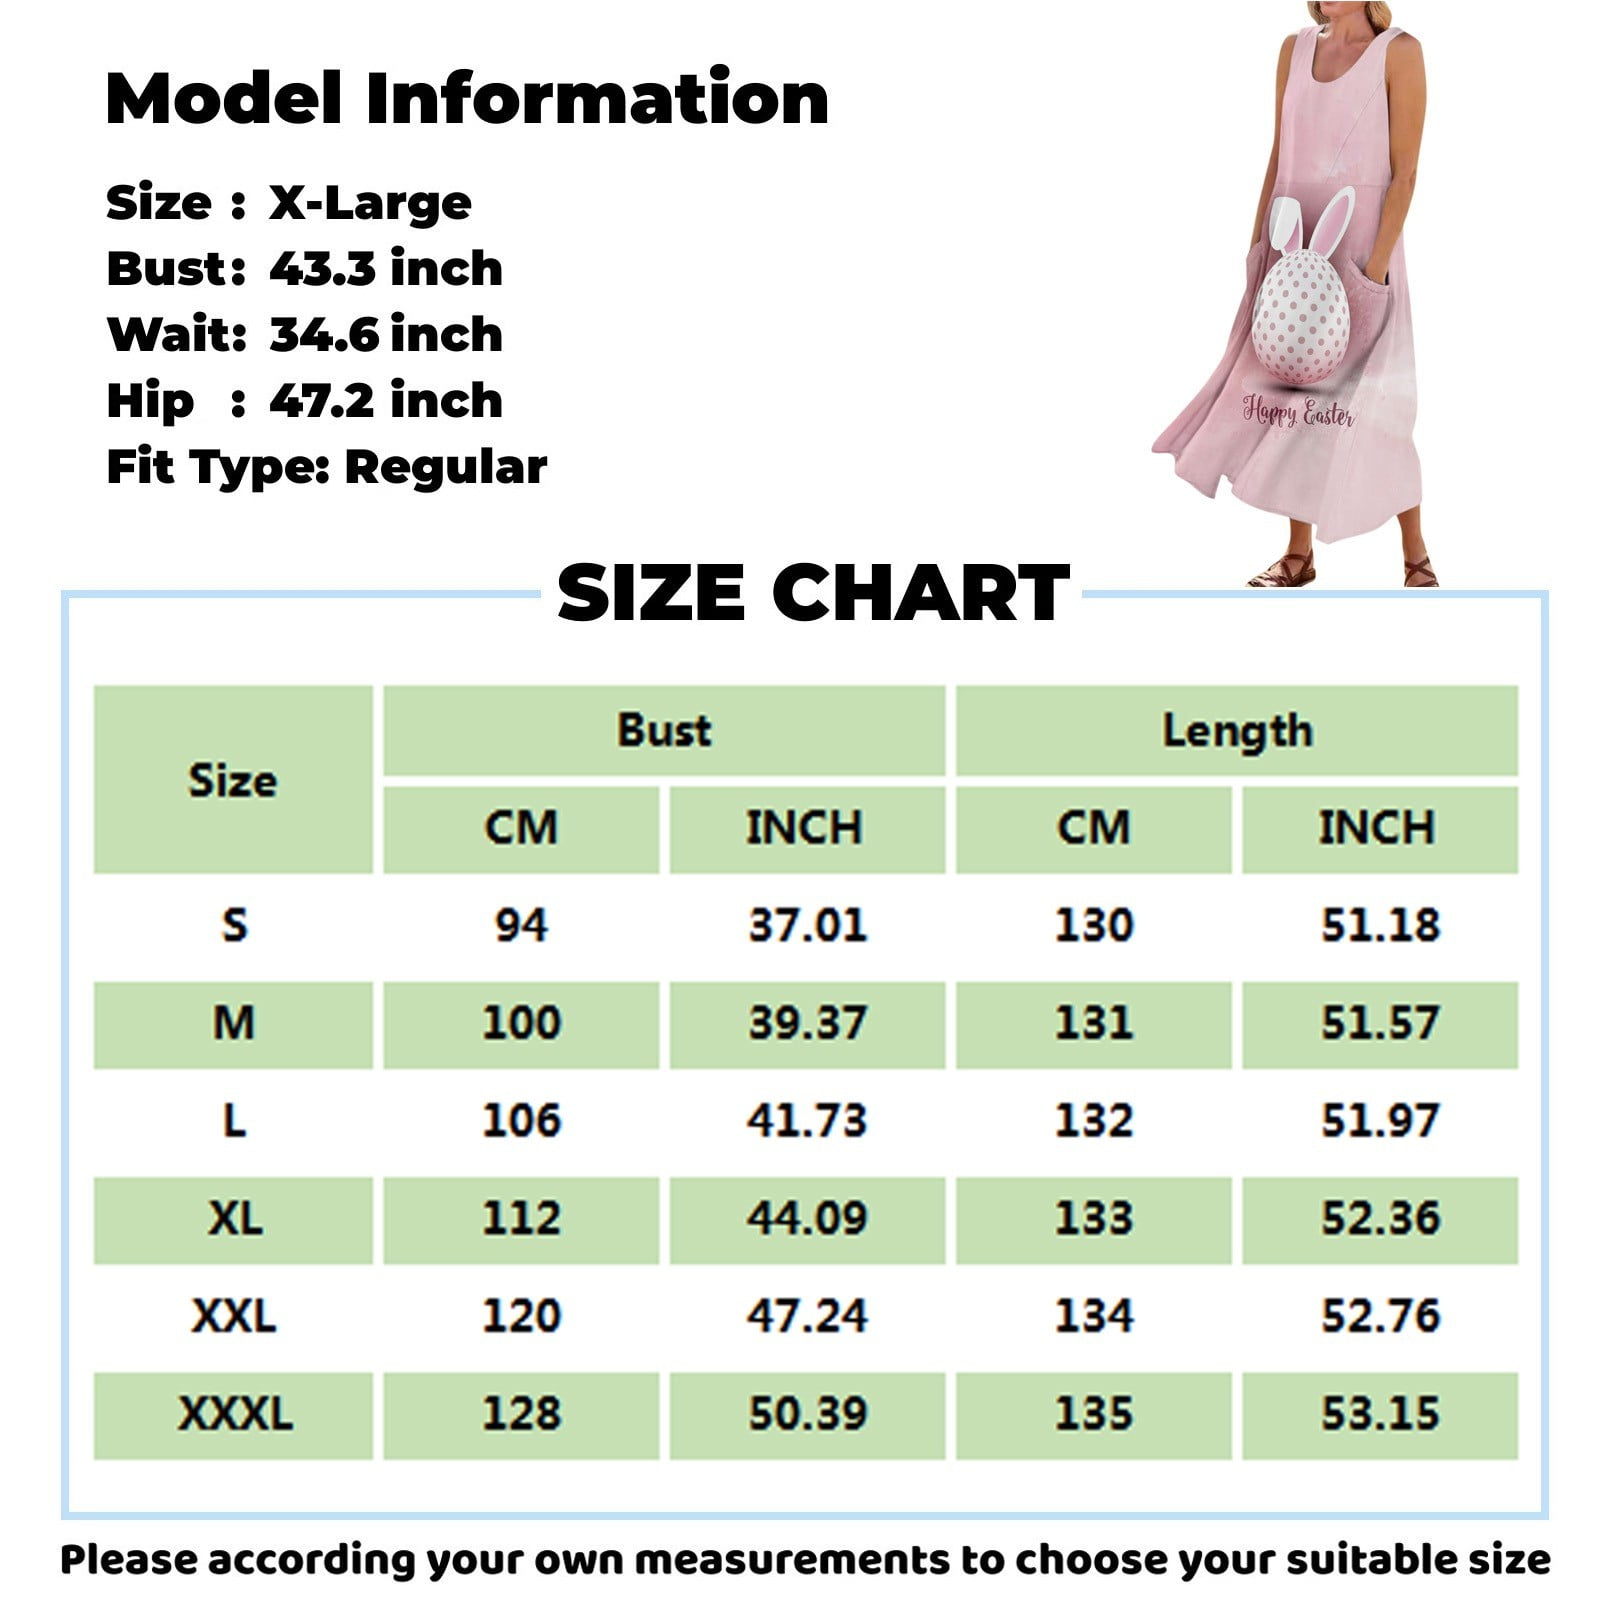 UoCefik Easter Long Dresses for Women Casual Sleeveless Easter Rabbit Bunny  Eggs Printed Flowy Mini Dresses Loose Fit Casual Dresses Sexy Summer Crew